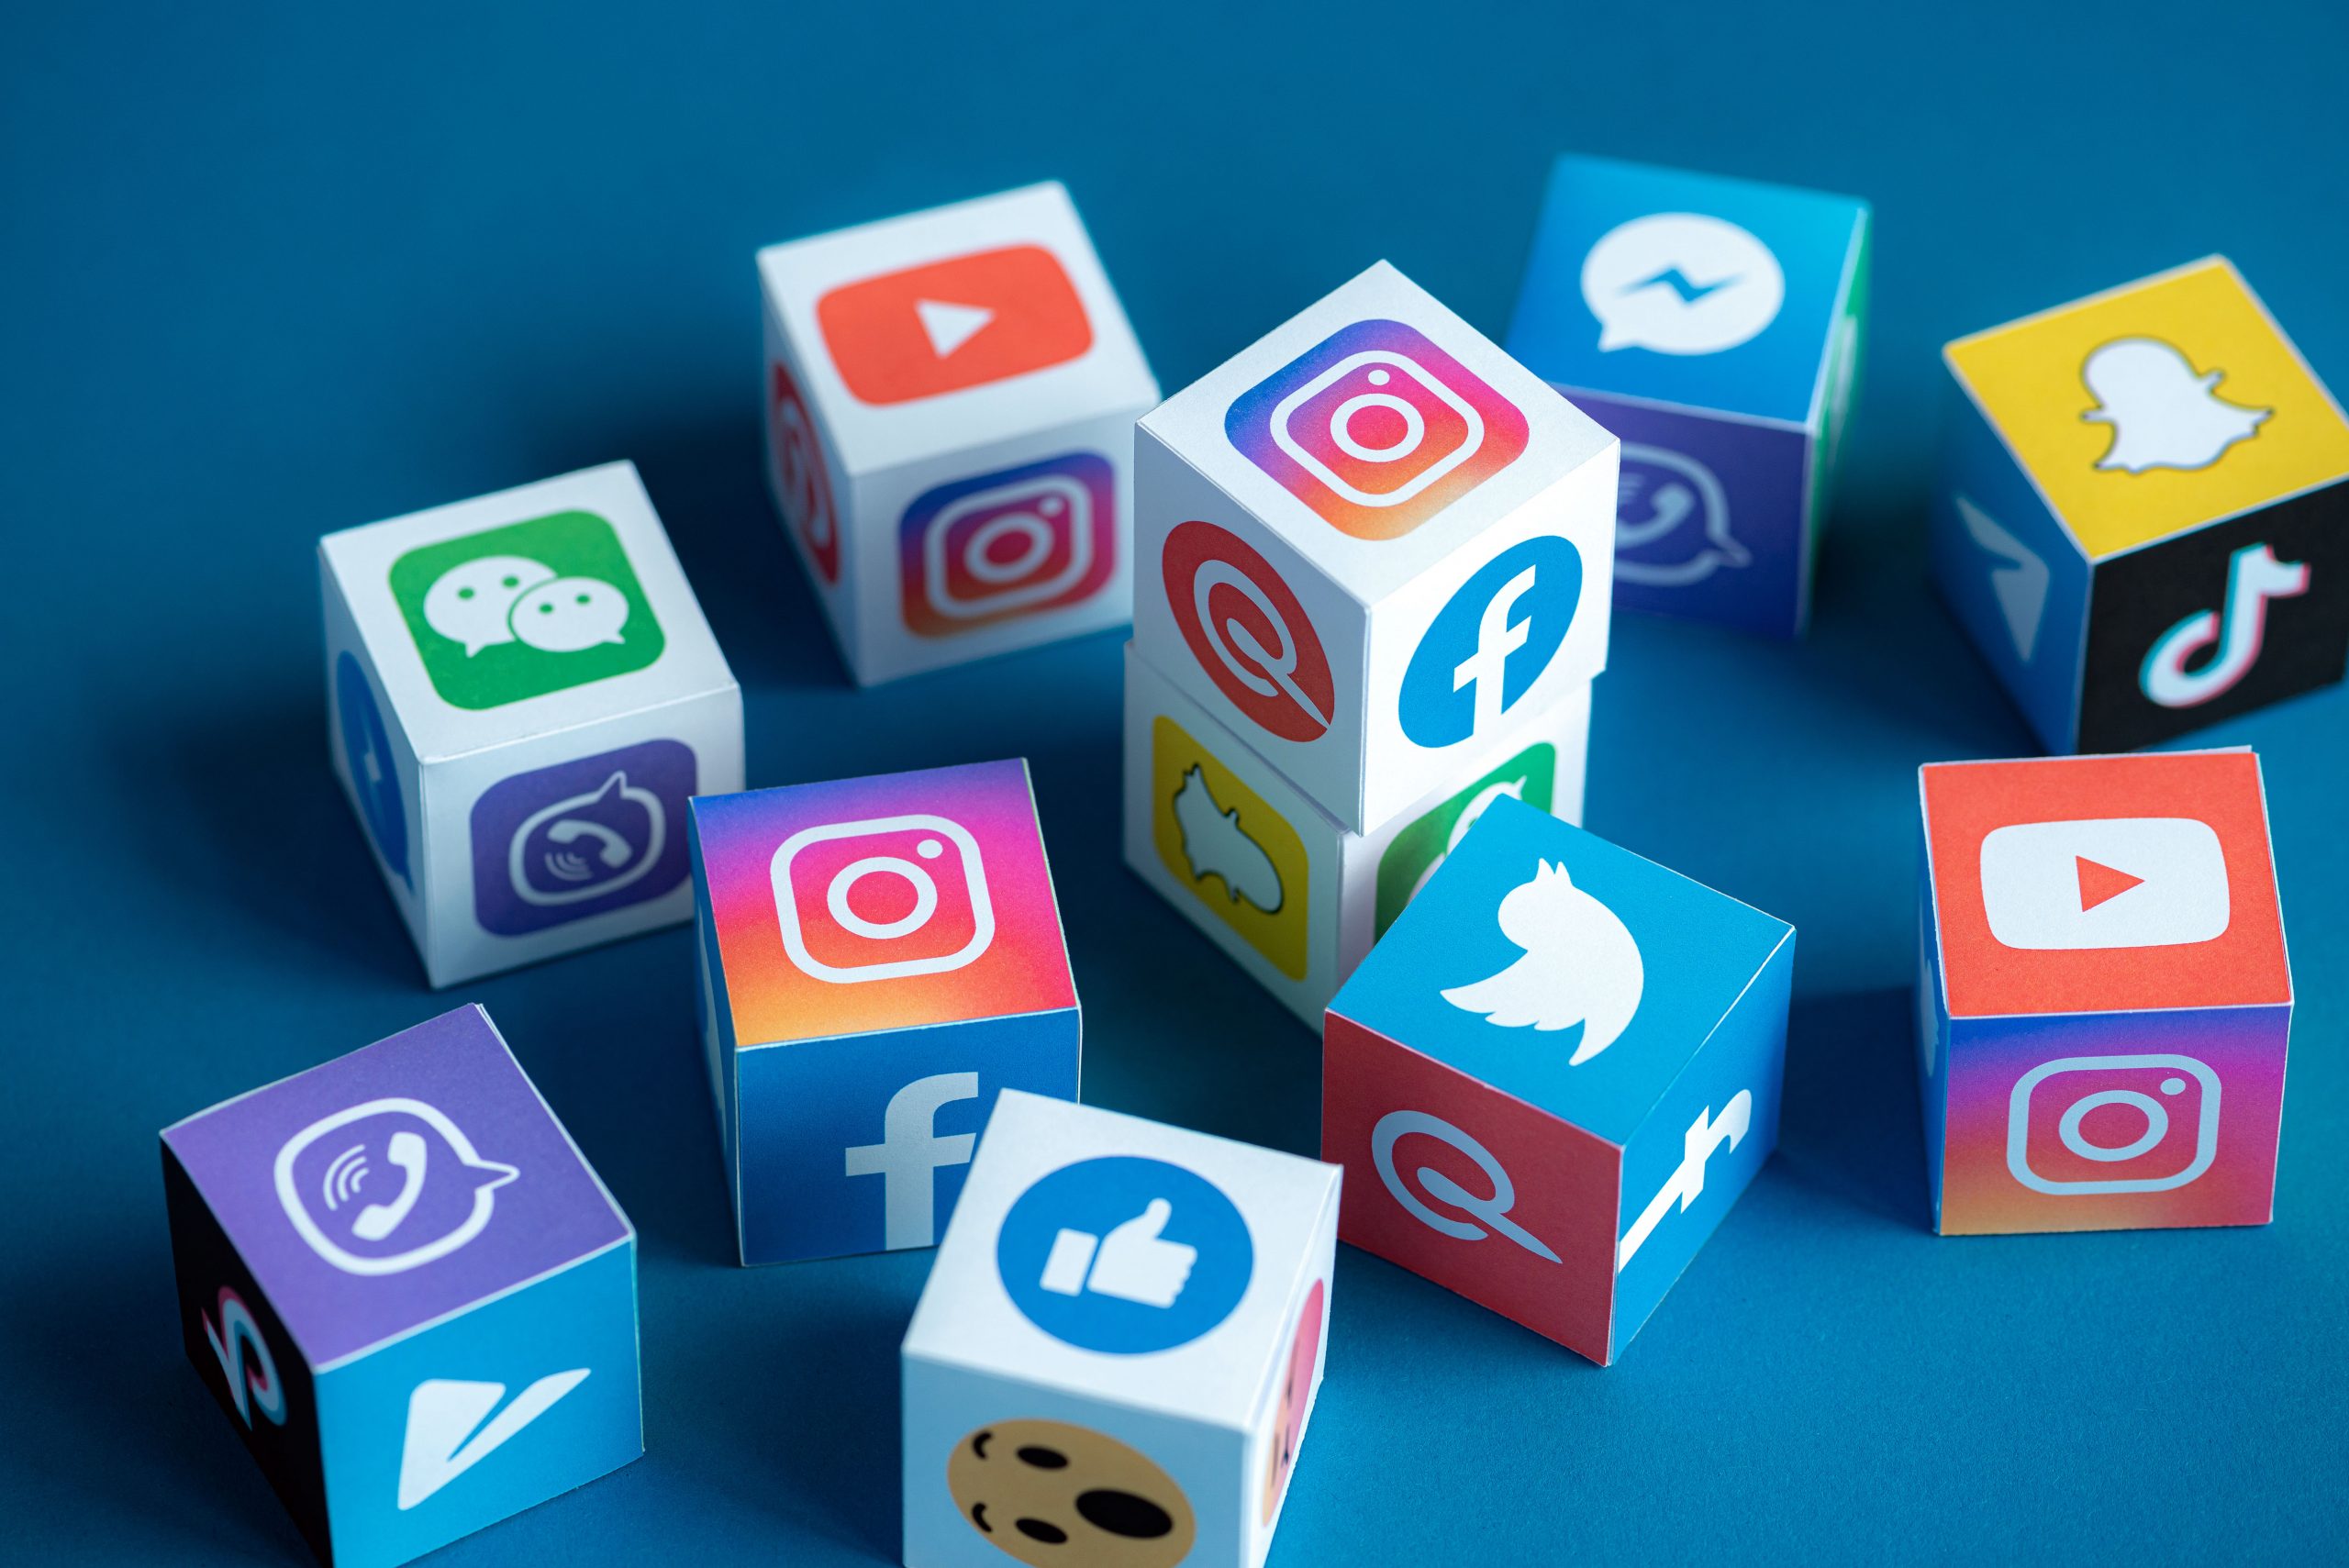 4 Tips to Improve Your Social Media Presence as a Small Business